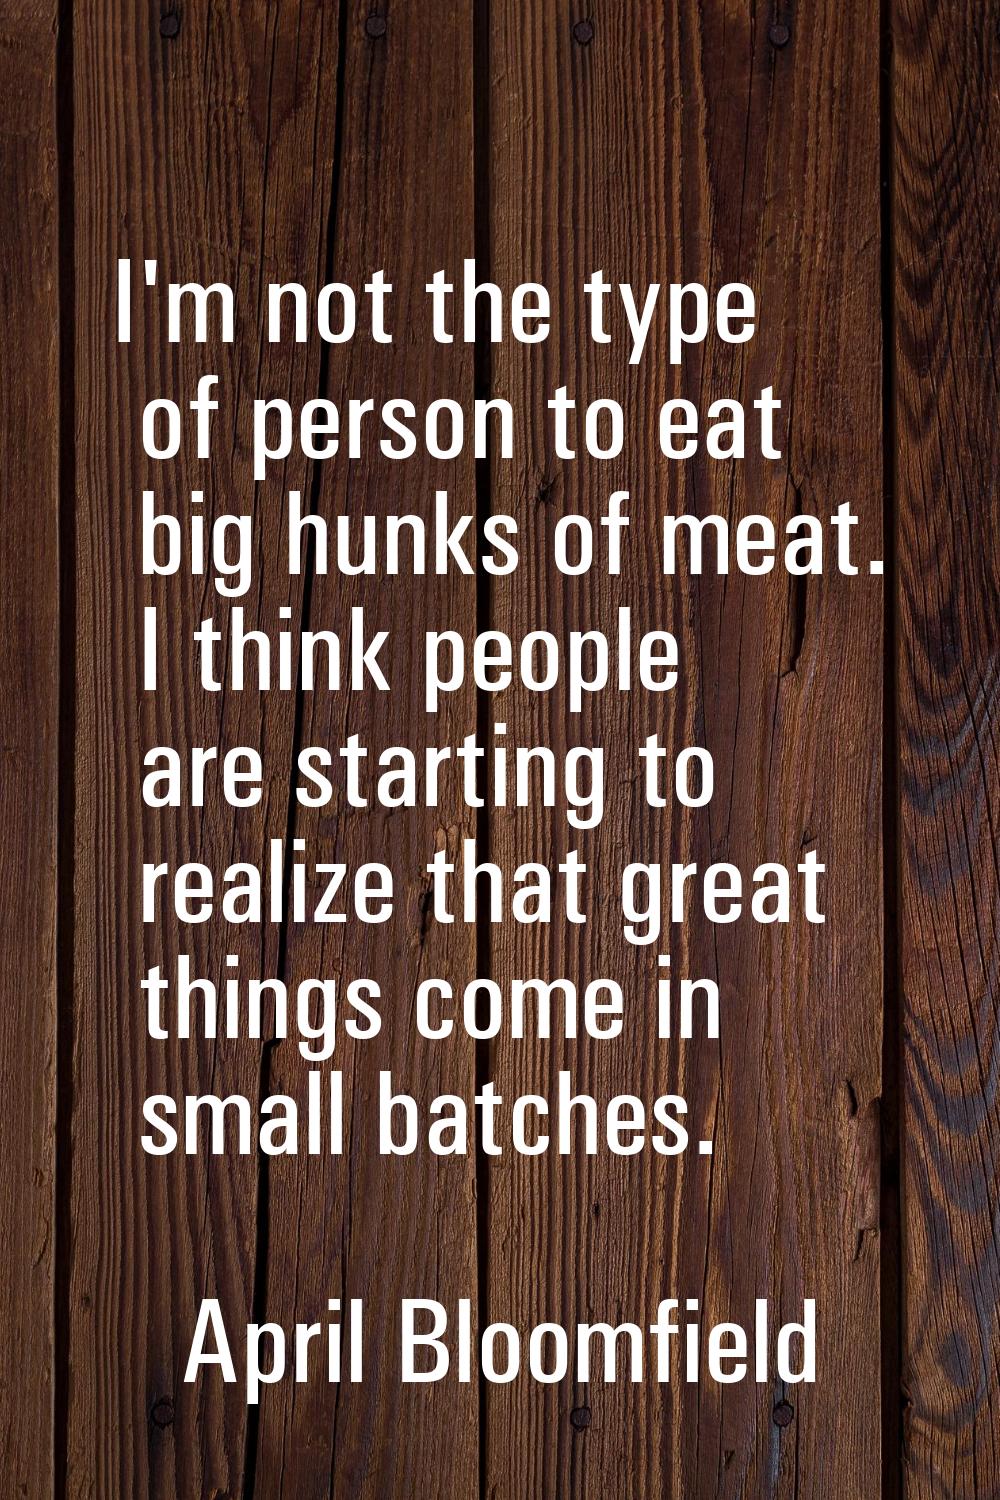 I'm not the type of person to eat big hunks of meat. I think people are starting to realize that gr